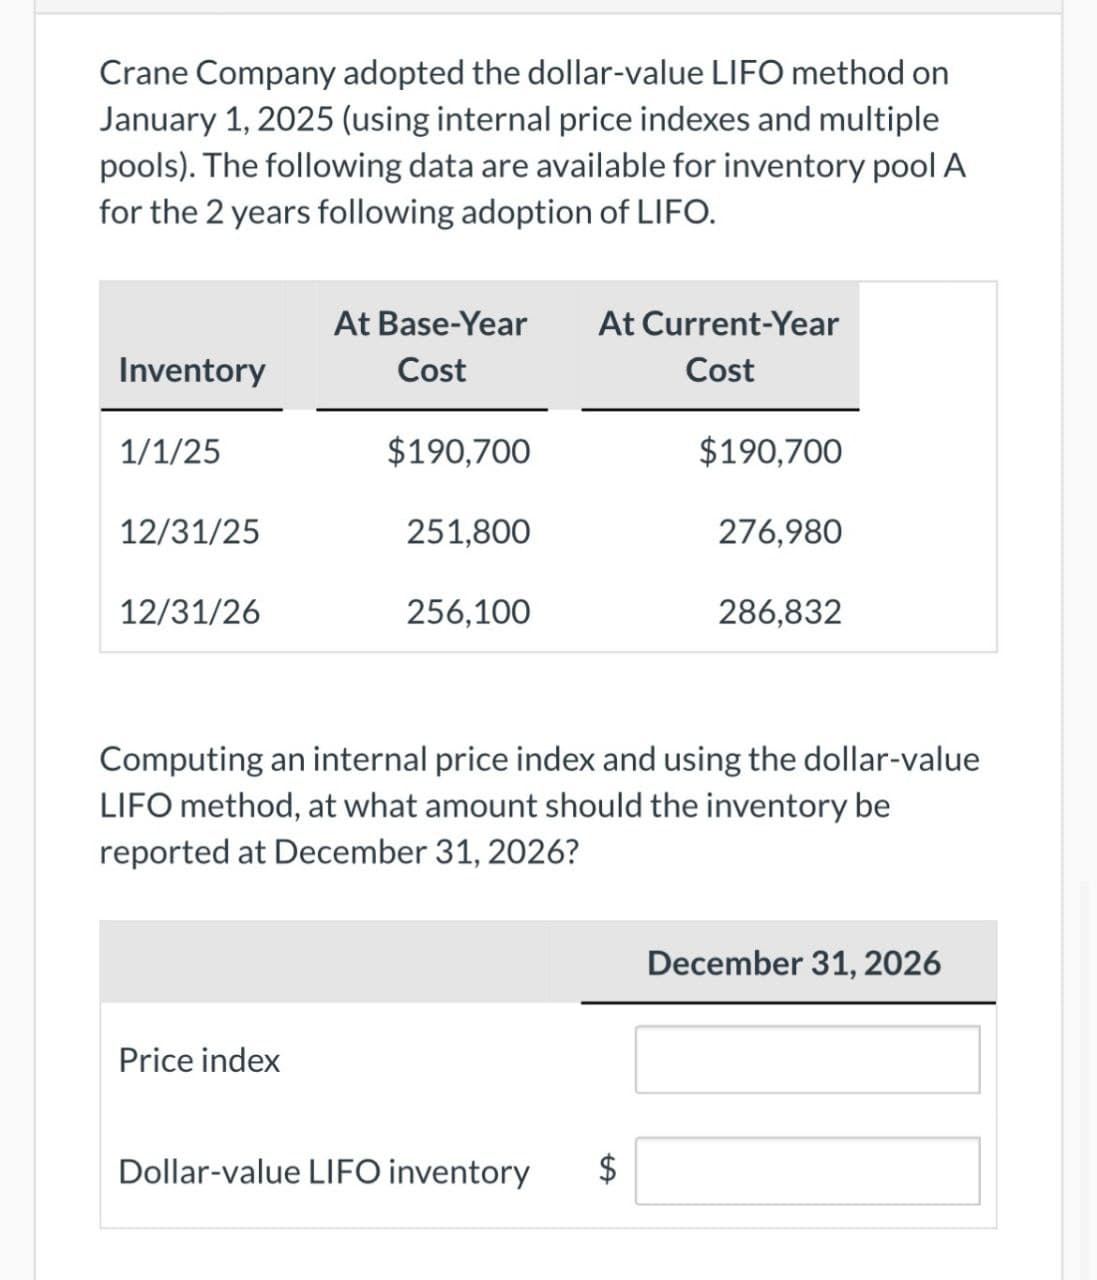 Crane Company adopted the dollar-value LIFO method on
January 1, 2025 (using internal price indexes and multiple
pools). The following data are available for inventory pool A
for the 2 years following adoption of LIFO.
At Base-Year At Current-Year
Inventory
Cost
Cost
1/1/25
$190,700
$190,700
12/31/25
251,800
276,980
12/31/26
256,100
286,832
Computing an internal price index and using the dollar-value
LIFO method, at what amount should the inventory be
reported at December 31, 2026?
Price index
Dollar-value LIFO inventory
A
December 31, 2026